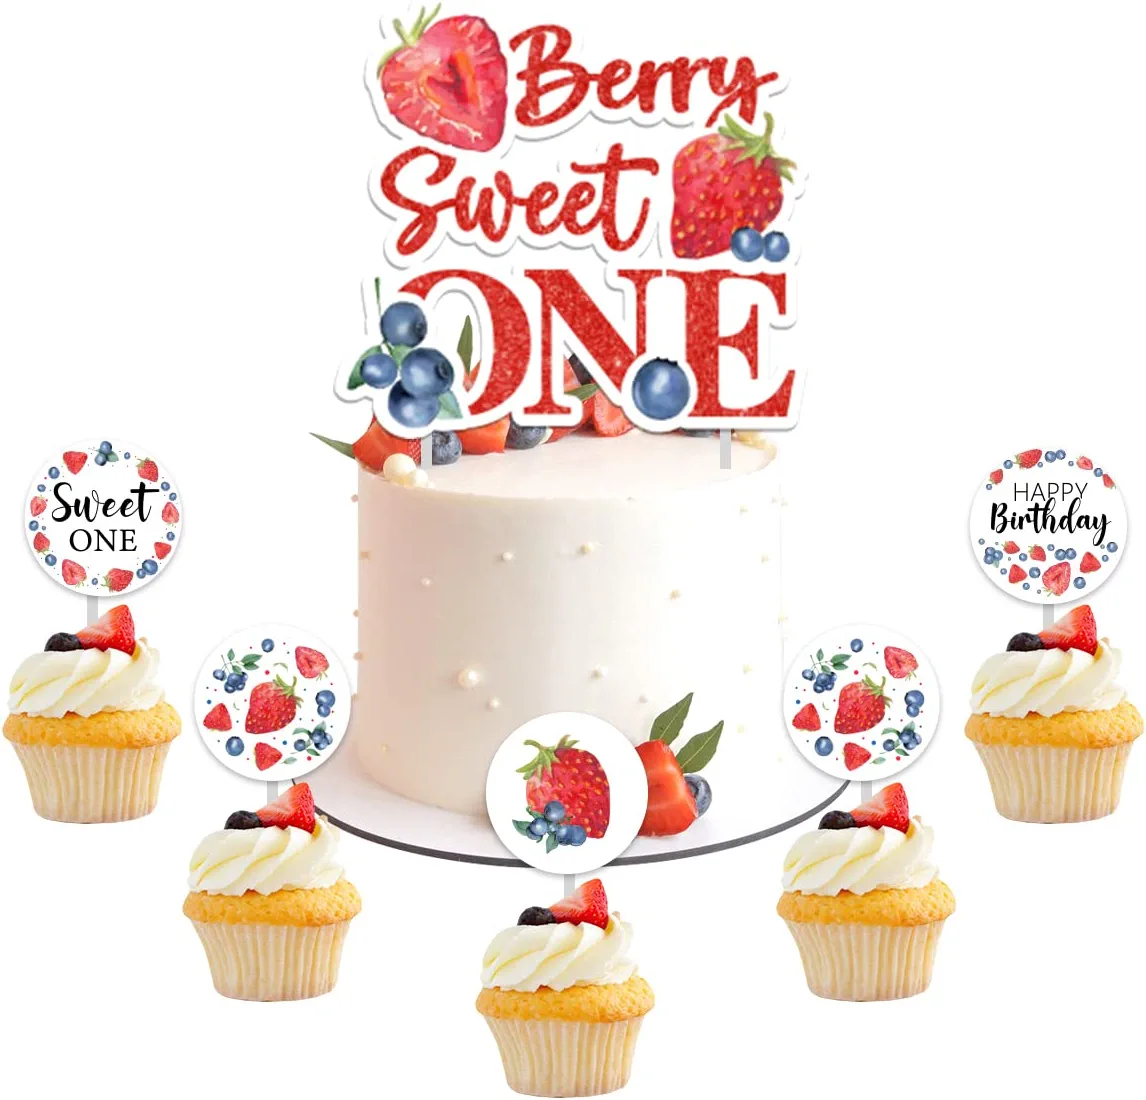 13pcs Berry Sweet One Cake Decorations, Strawberry Birthday Cake Topper, Sweet One Cupcake Toppers Red Strawberry and Blueberry 1st Birthday Decorations Fruit Themed Birthday Supplies for Girls - Walmart.com